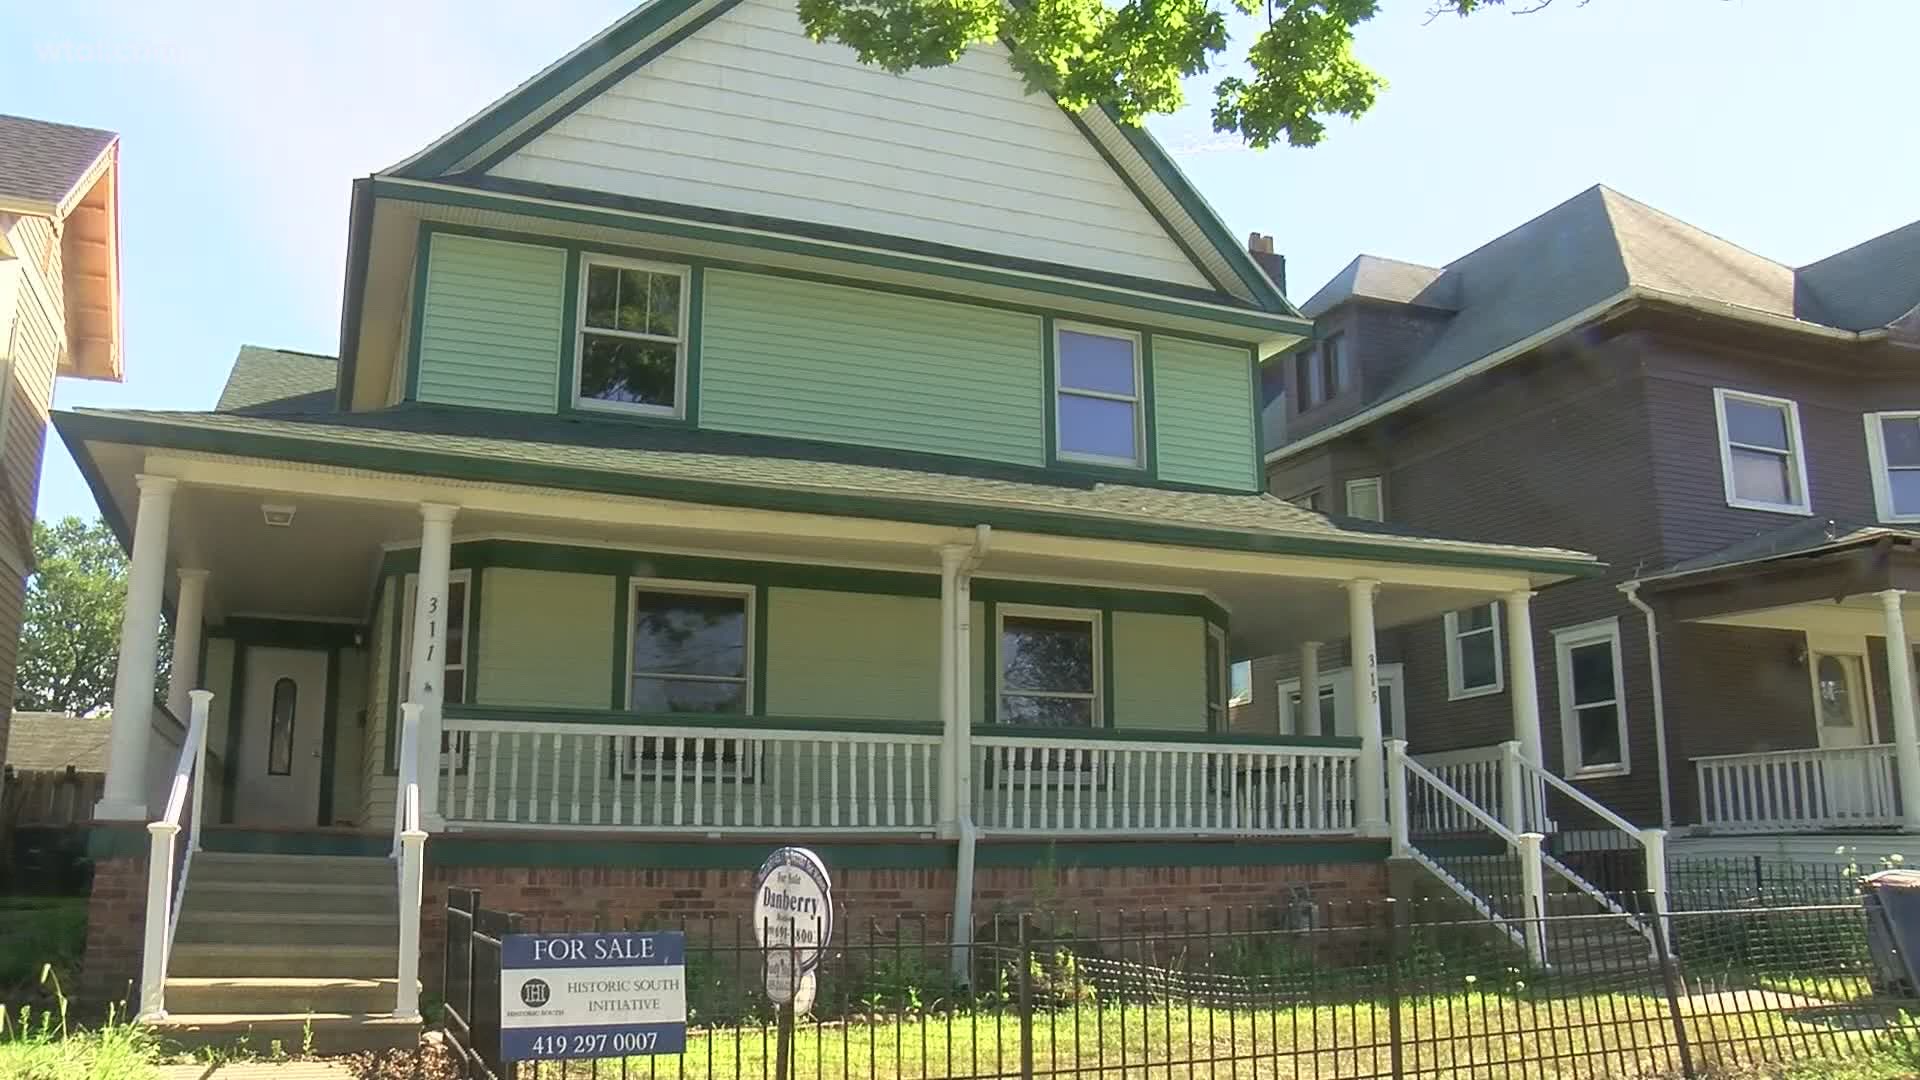 The Historic South Initiviative announced on Wednesday it will soon close on a renovated home worth $100,000.